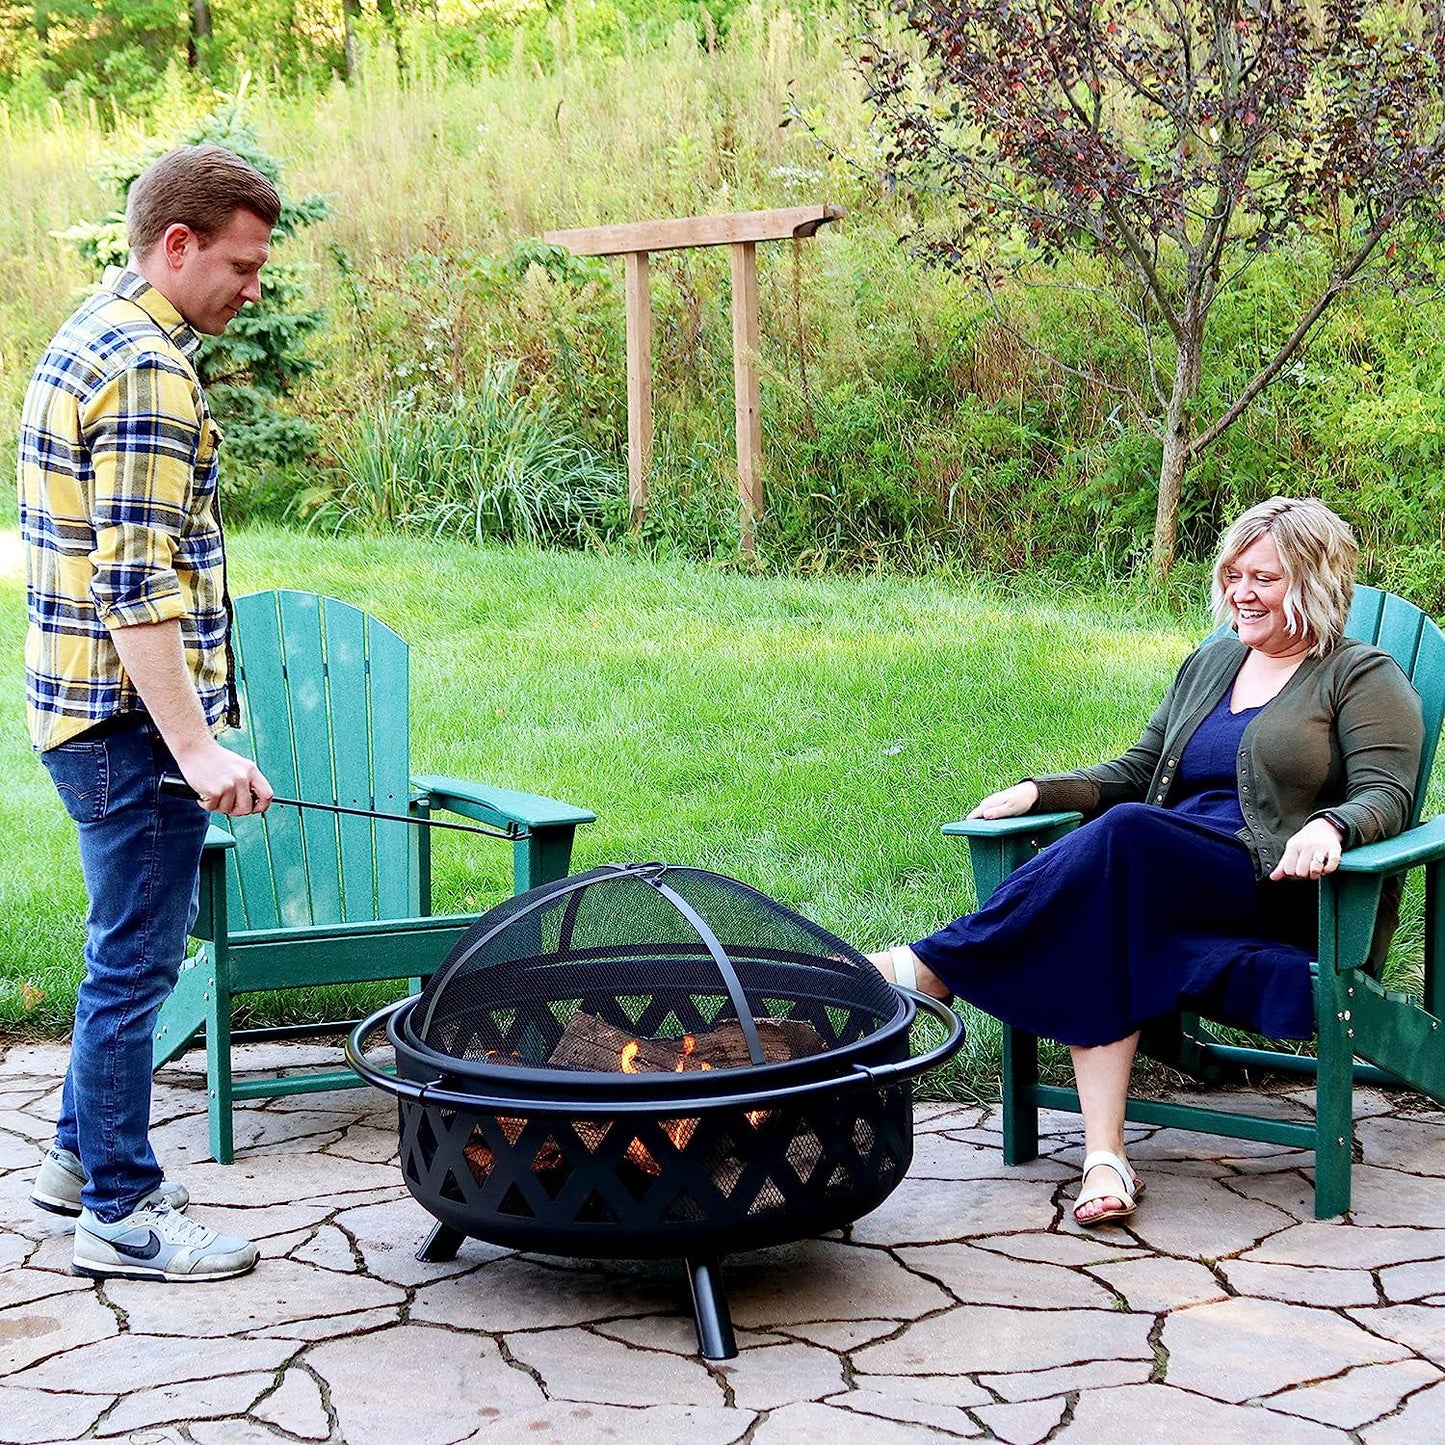 Black Crossweave Large Outdoor Fire Pit - 36-Inch Heavy-Duty Wood-Burning Fire Pit with Spark Screen for Patio and Backyard Bonfires - Includes Poker and Round Fire Pit Cover